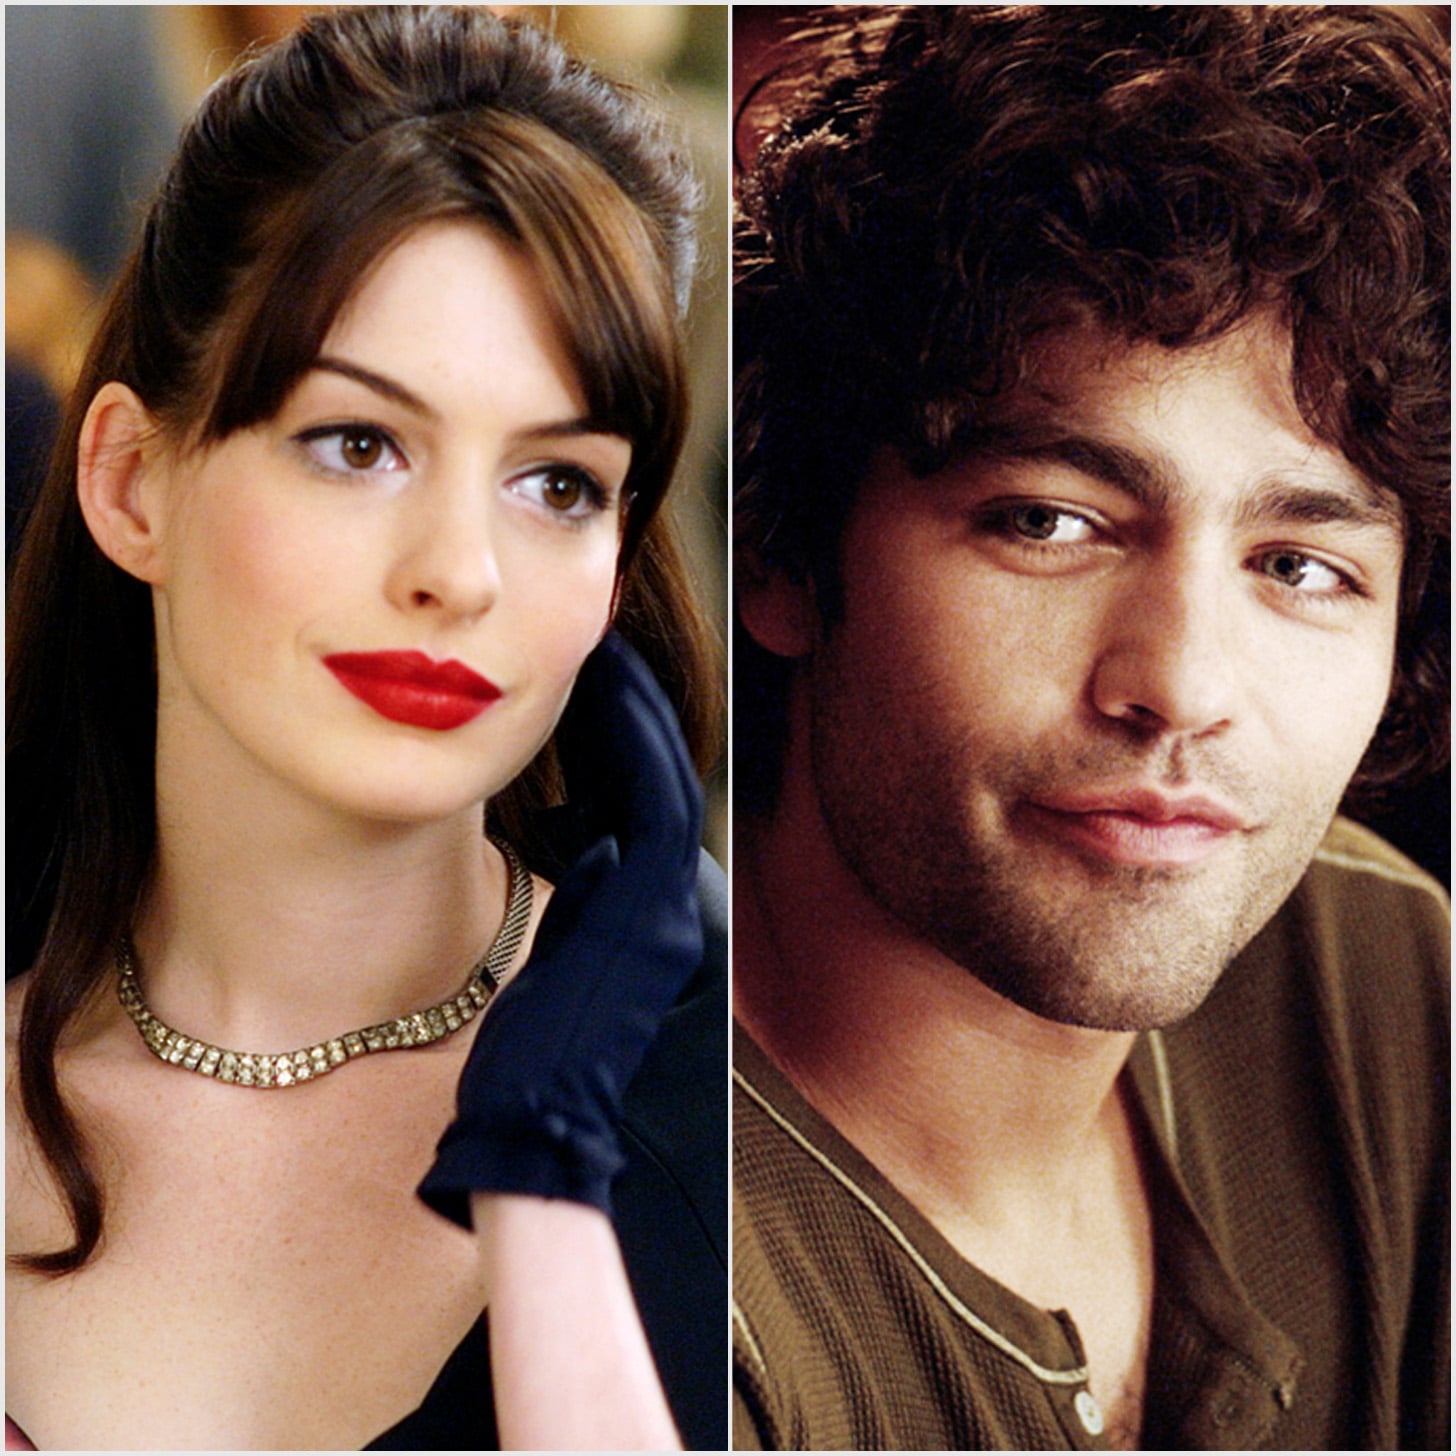 Anne Hathaway Disagrees That Nate Is the Villain in “The Devil Wears Prada”